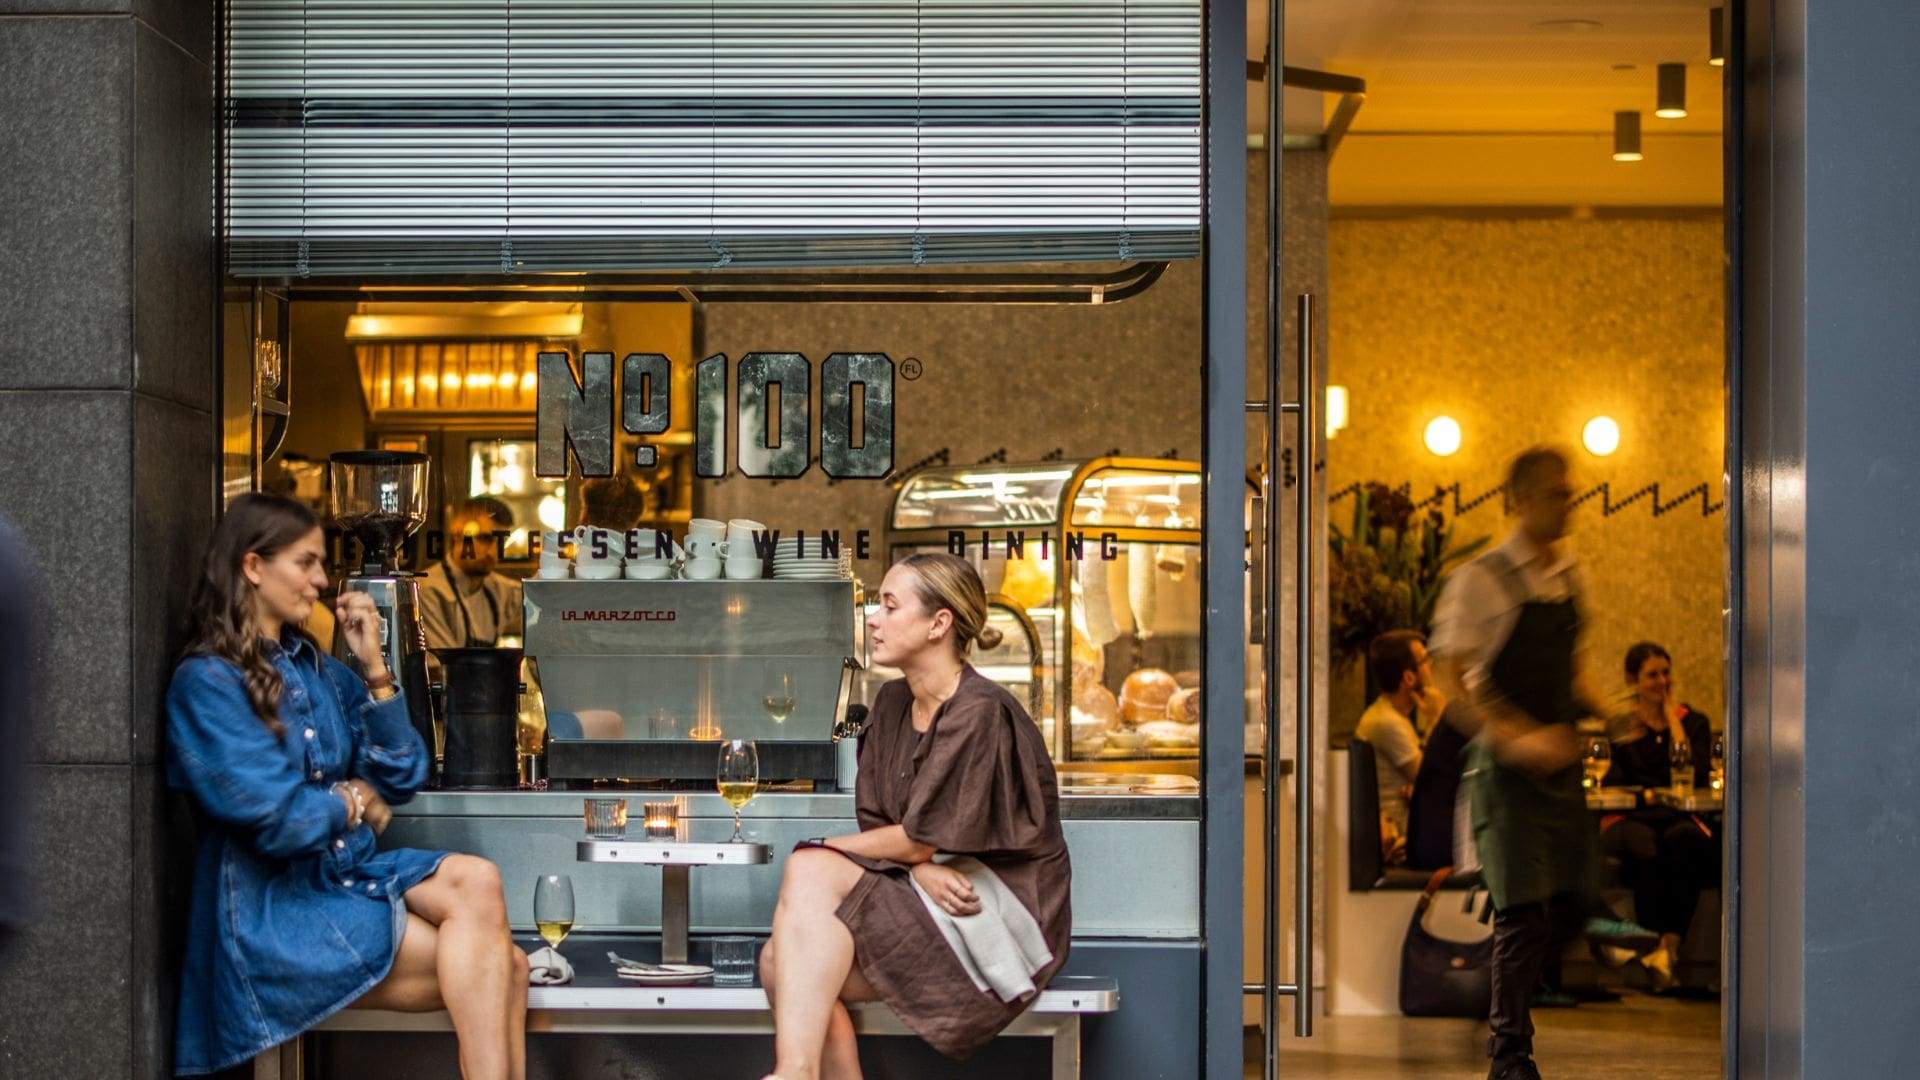 The Code Black Crew Has Opened a Chic Wine Bar and Deli on Flinders Lane